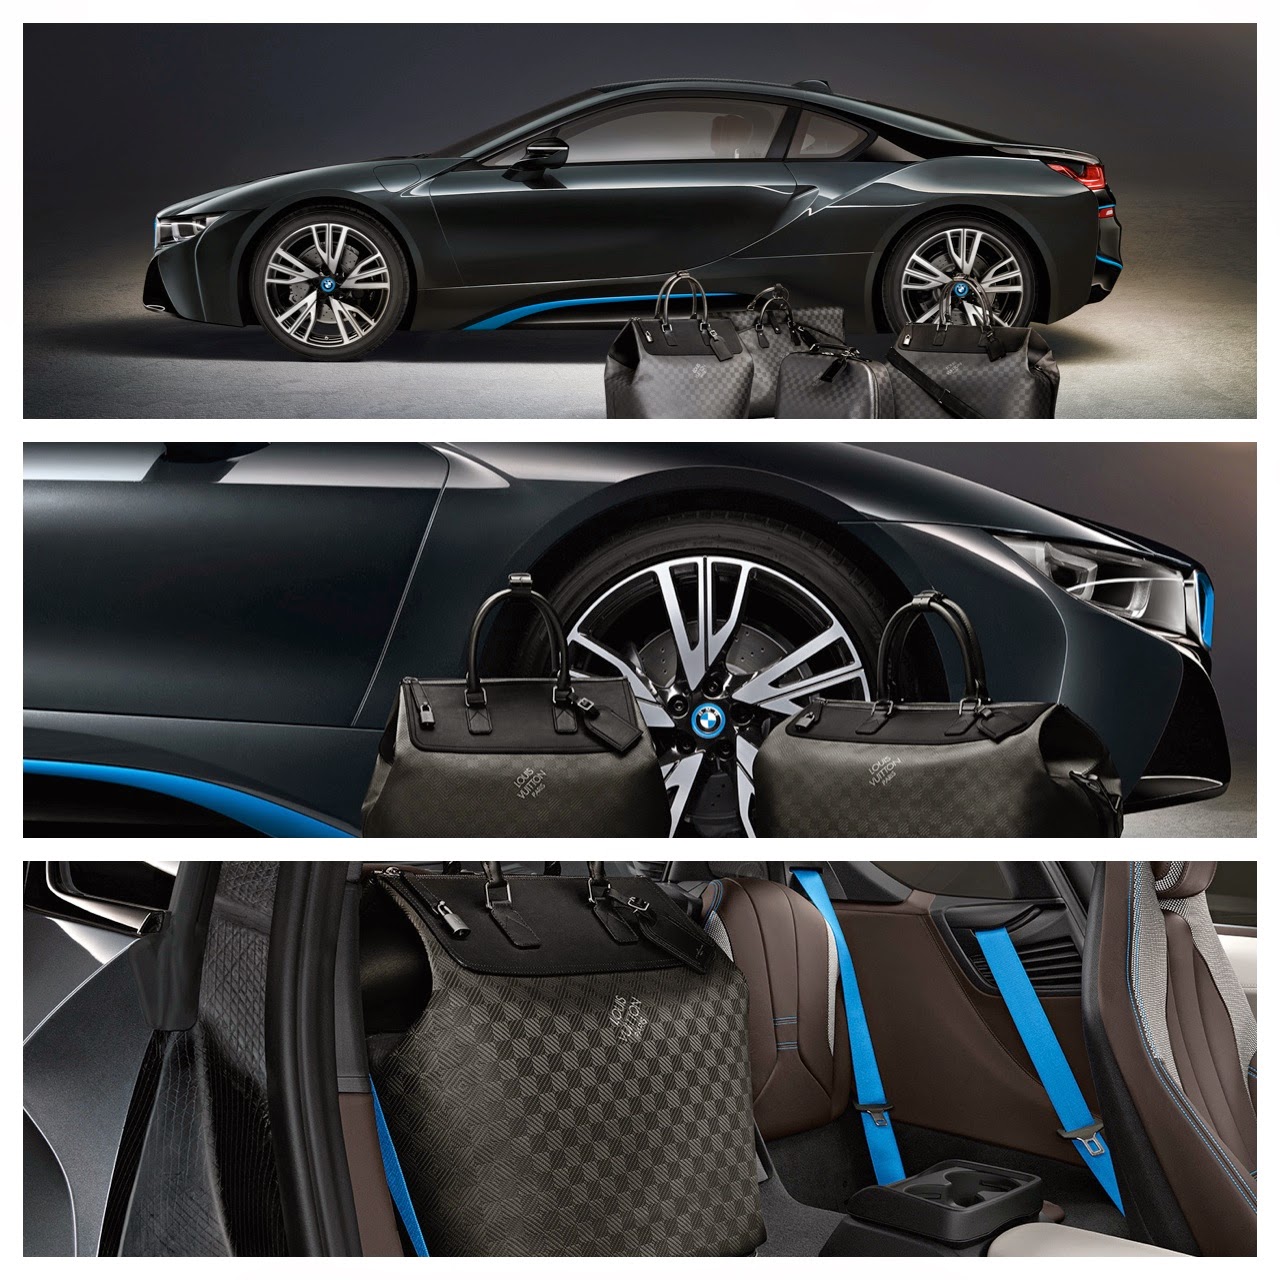 Louis Vuitton creates tailor-made luggage for the BMW i8. Forward-looking travel  bags for progressive driving made from carbon fibre.